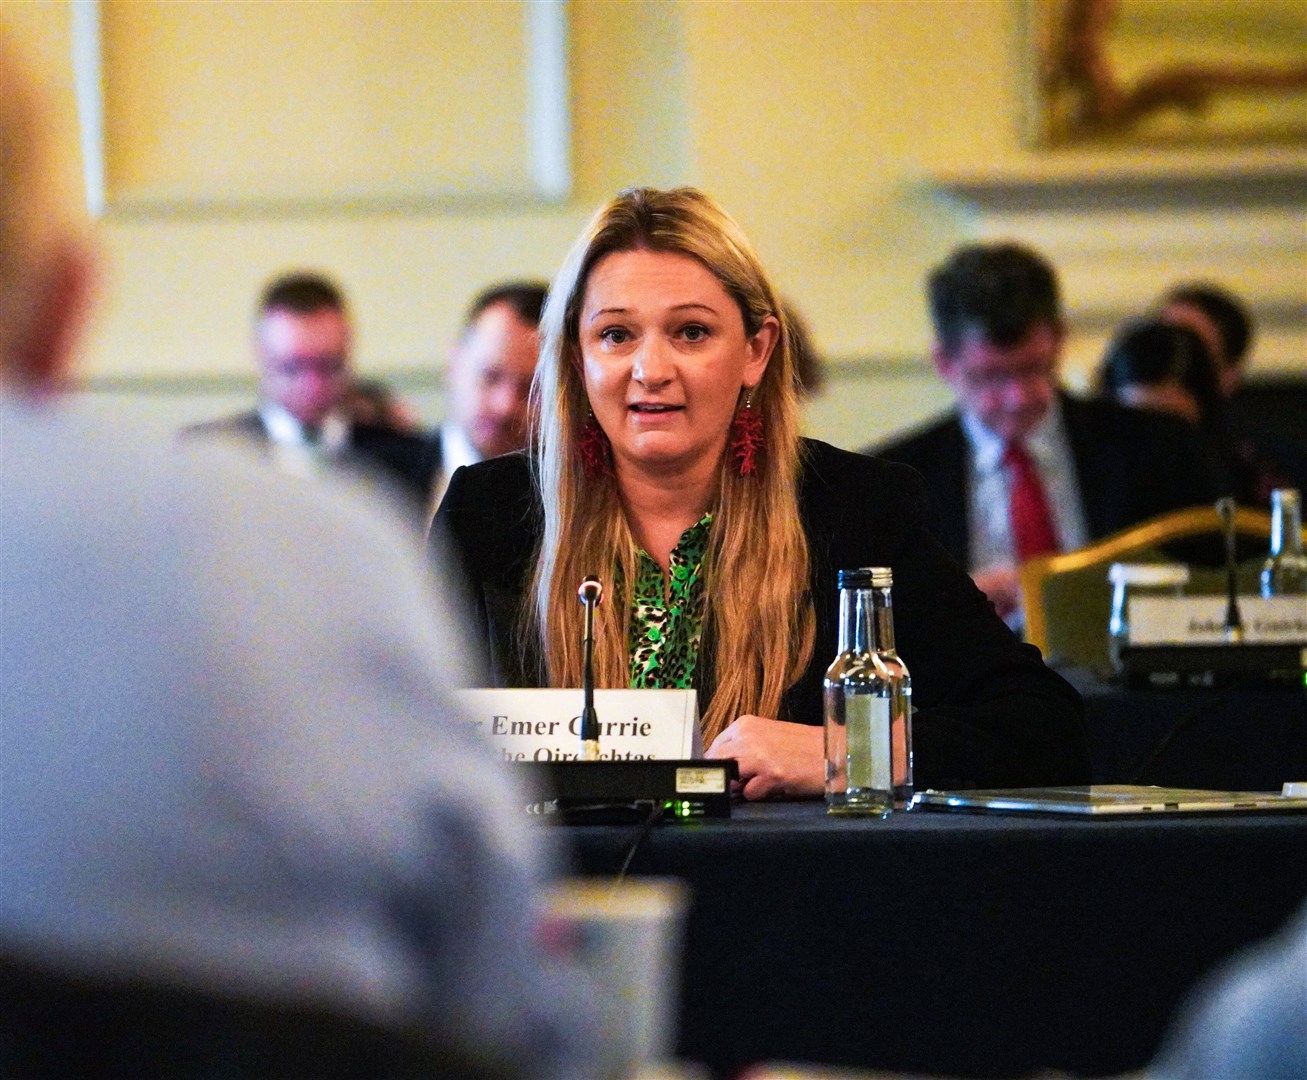 Senator Emer Currie, chairwoman of the Sovereign Affairs Committee of the British-Irish Parliamentary Assembly (PA)